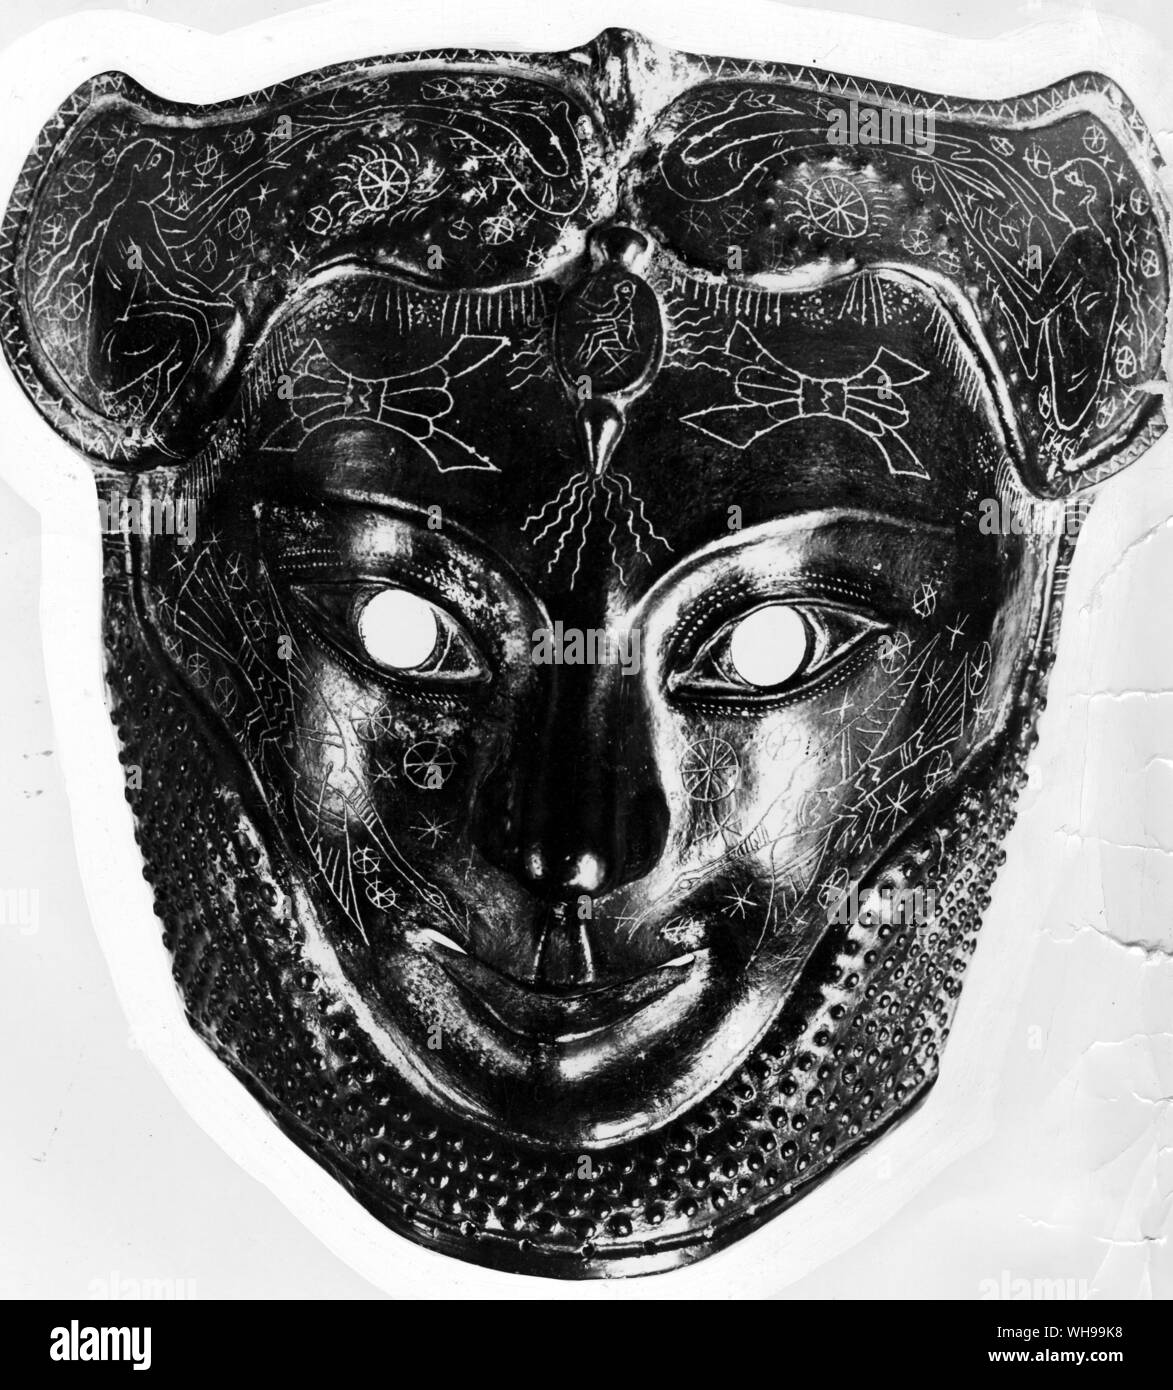 Silver Mask engraved with stylized figures of birds and cabalistic signs it was found covering the face of a corpse in an Etruscan tomb Stock Photo